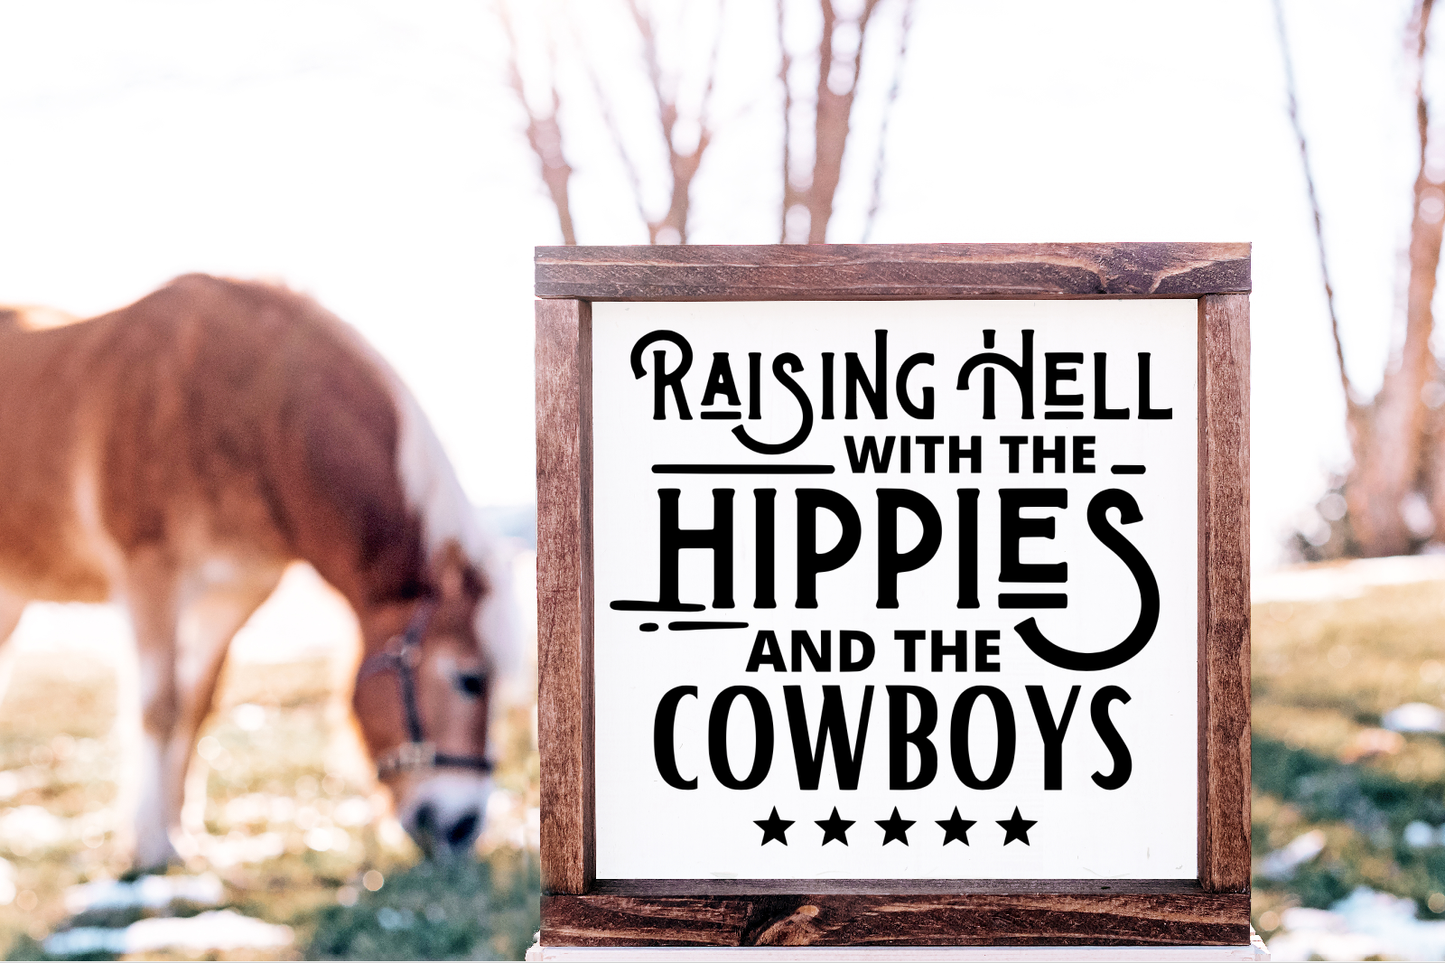 Raising Hell With The Hippies and the Cowboys